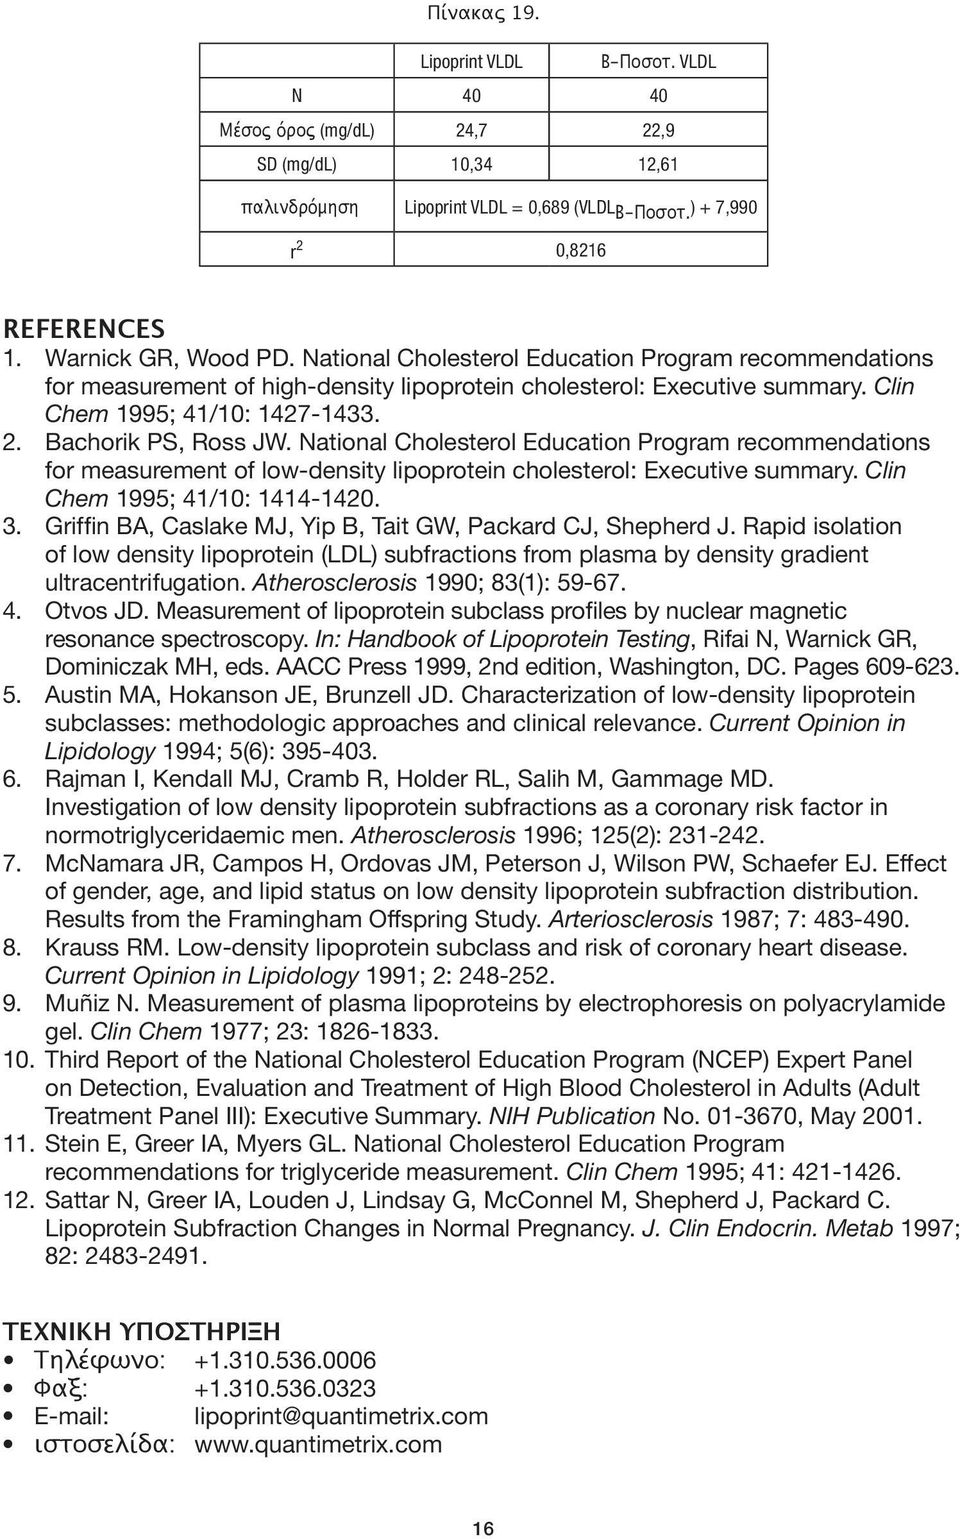 National Cholesterol Education Program recommendations for measurement of low-density lipoprotein cholesterol: Executive summary. Clin Chem 1995; 41/10: 1414-1420. 3.